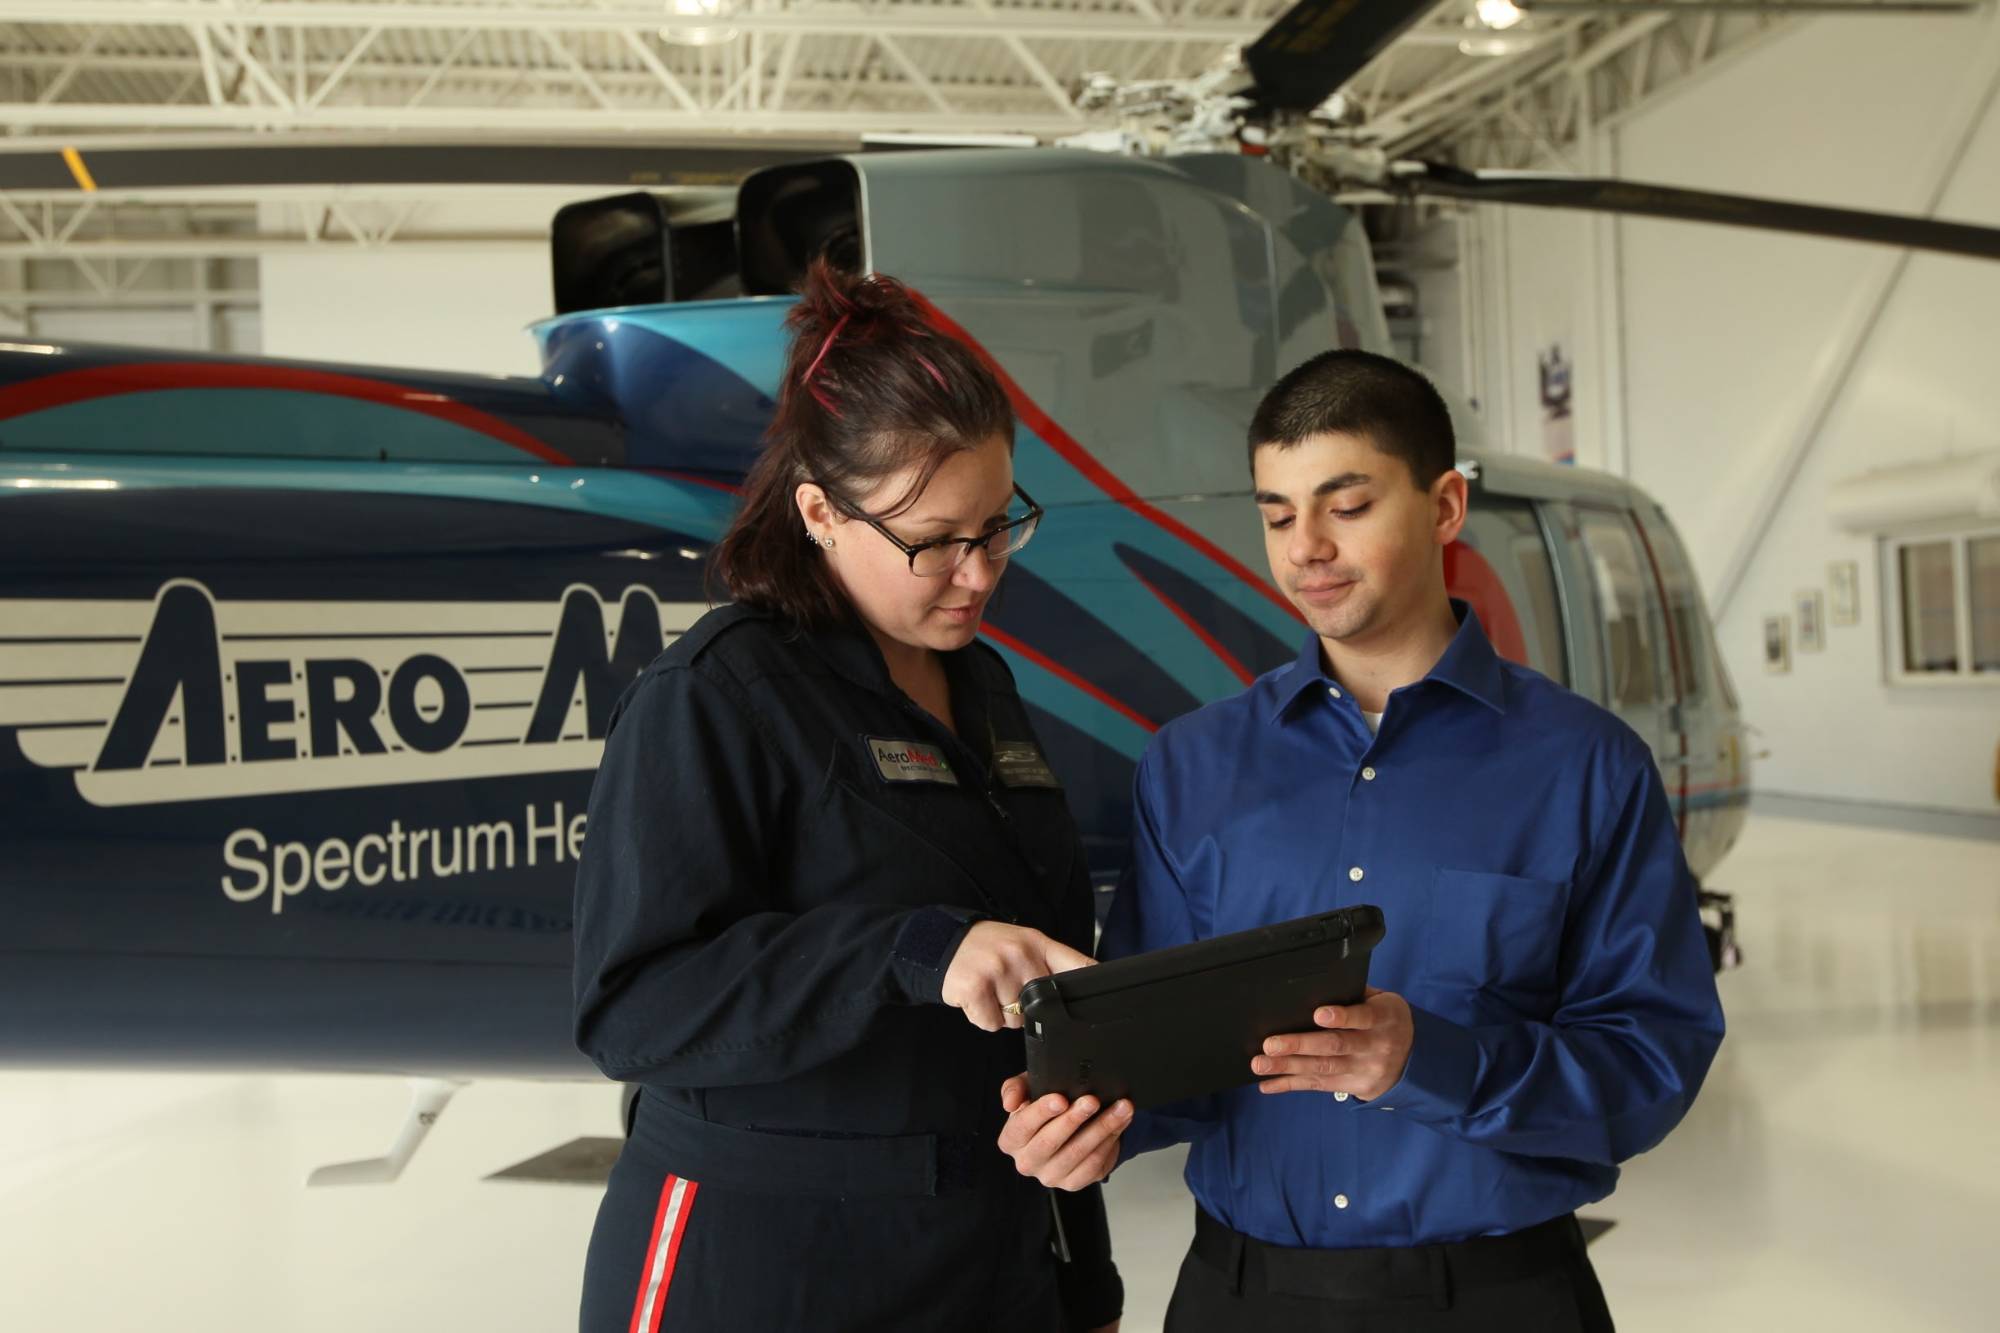 2 people looking at an iPad standing in front of a medical helicopter